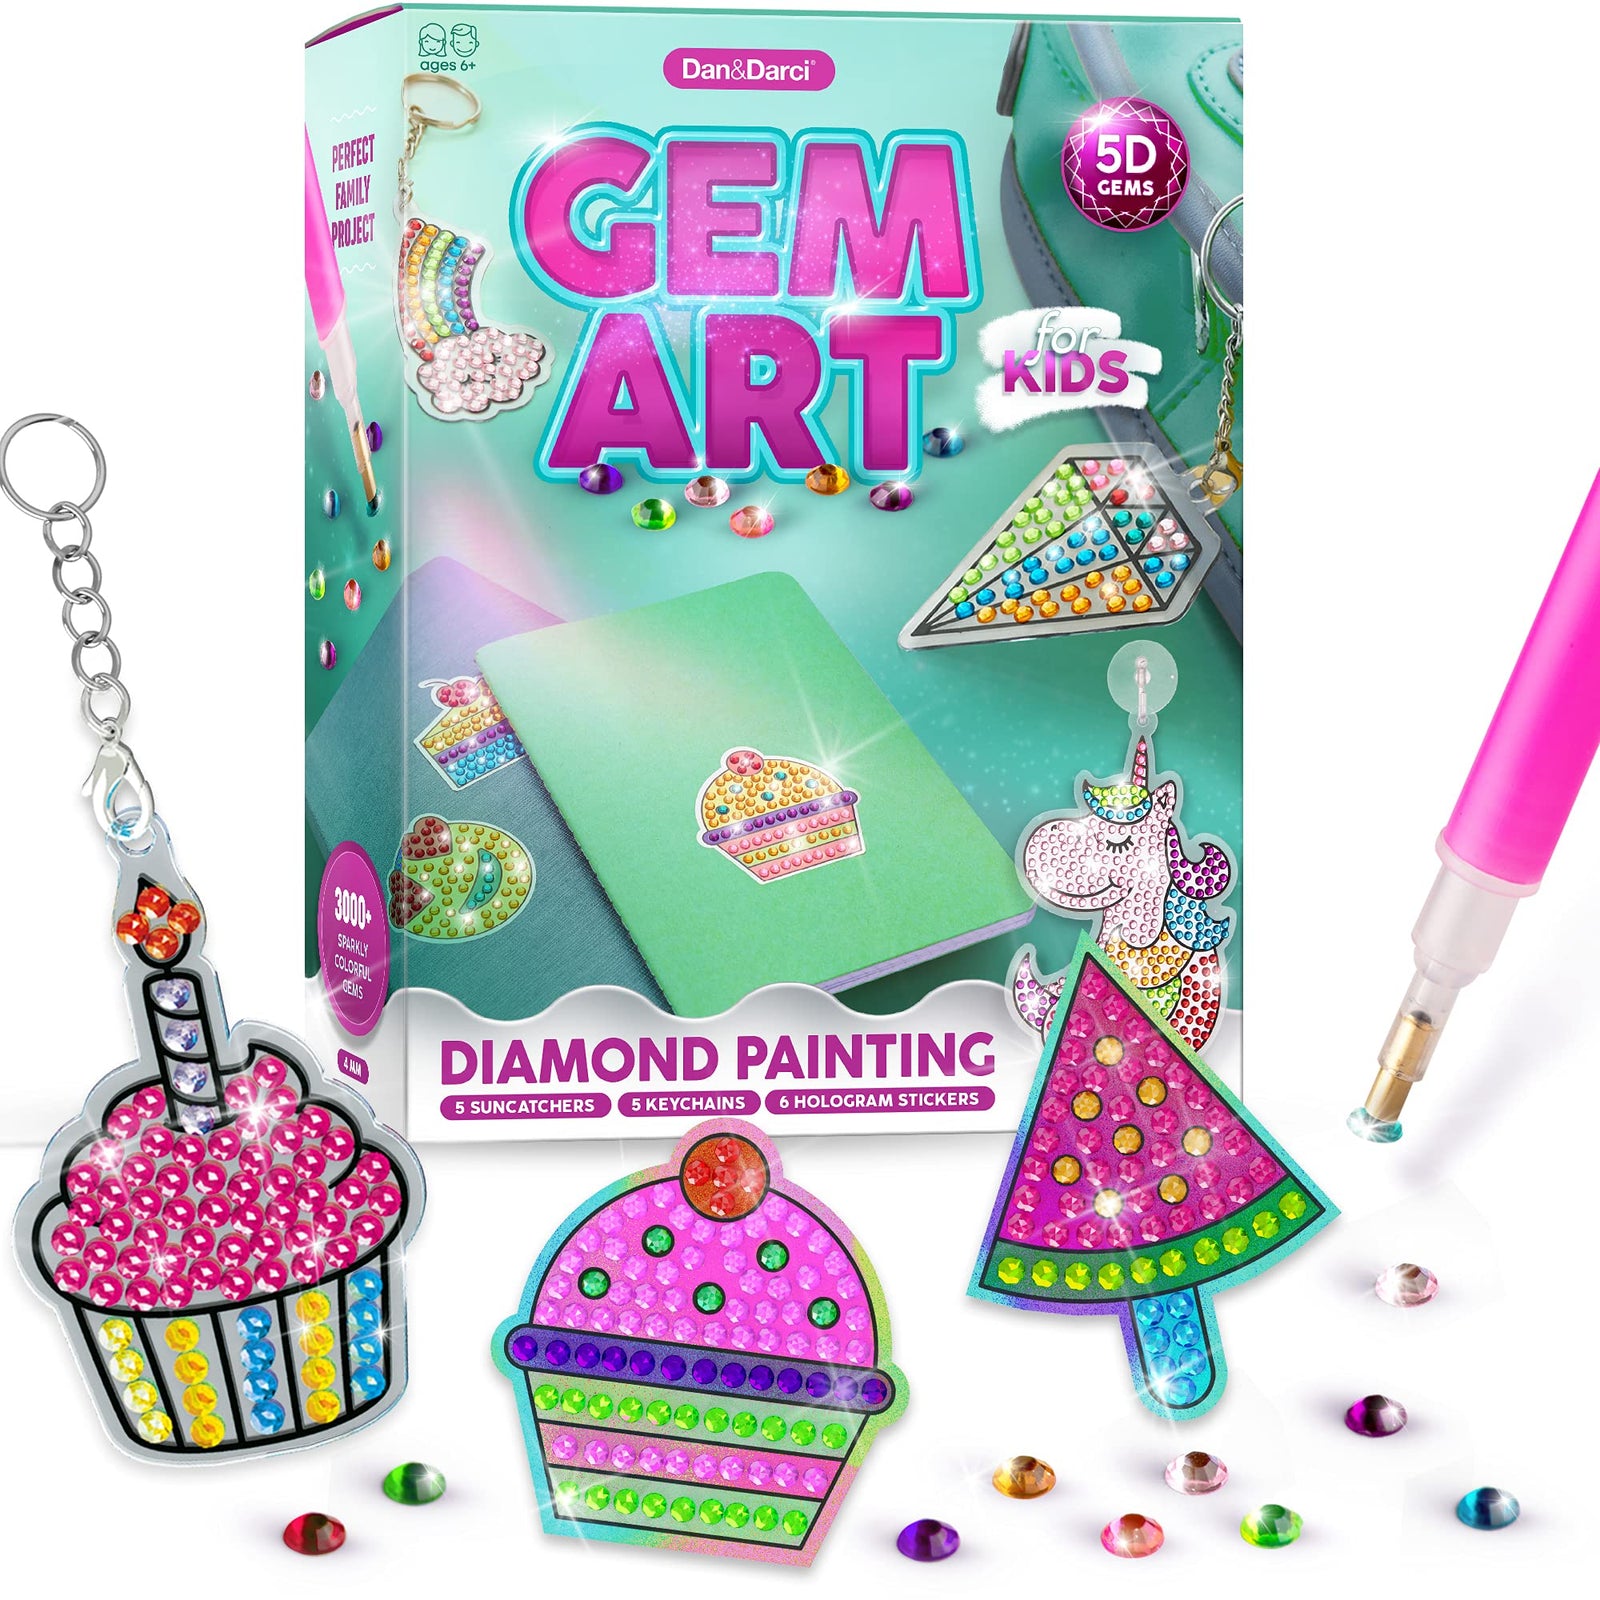 Gem Art, Kids Diamond Painting Kit - Big 5D Gems - Arts and Crafts for Kids, Girls and Boys Ages 6-12 - Gem Painting Kits - Best Tween Gift Ideas for Girls Crafts Age 4, 5, 6, 7, 8, 9, 10-12